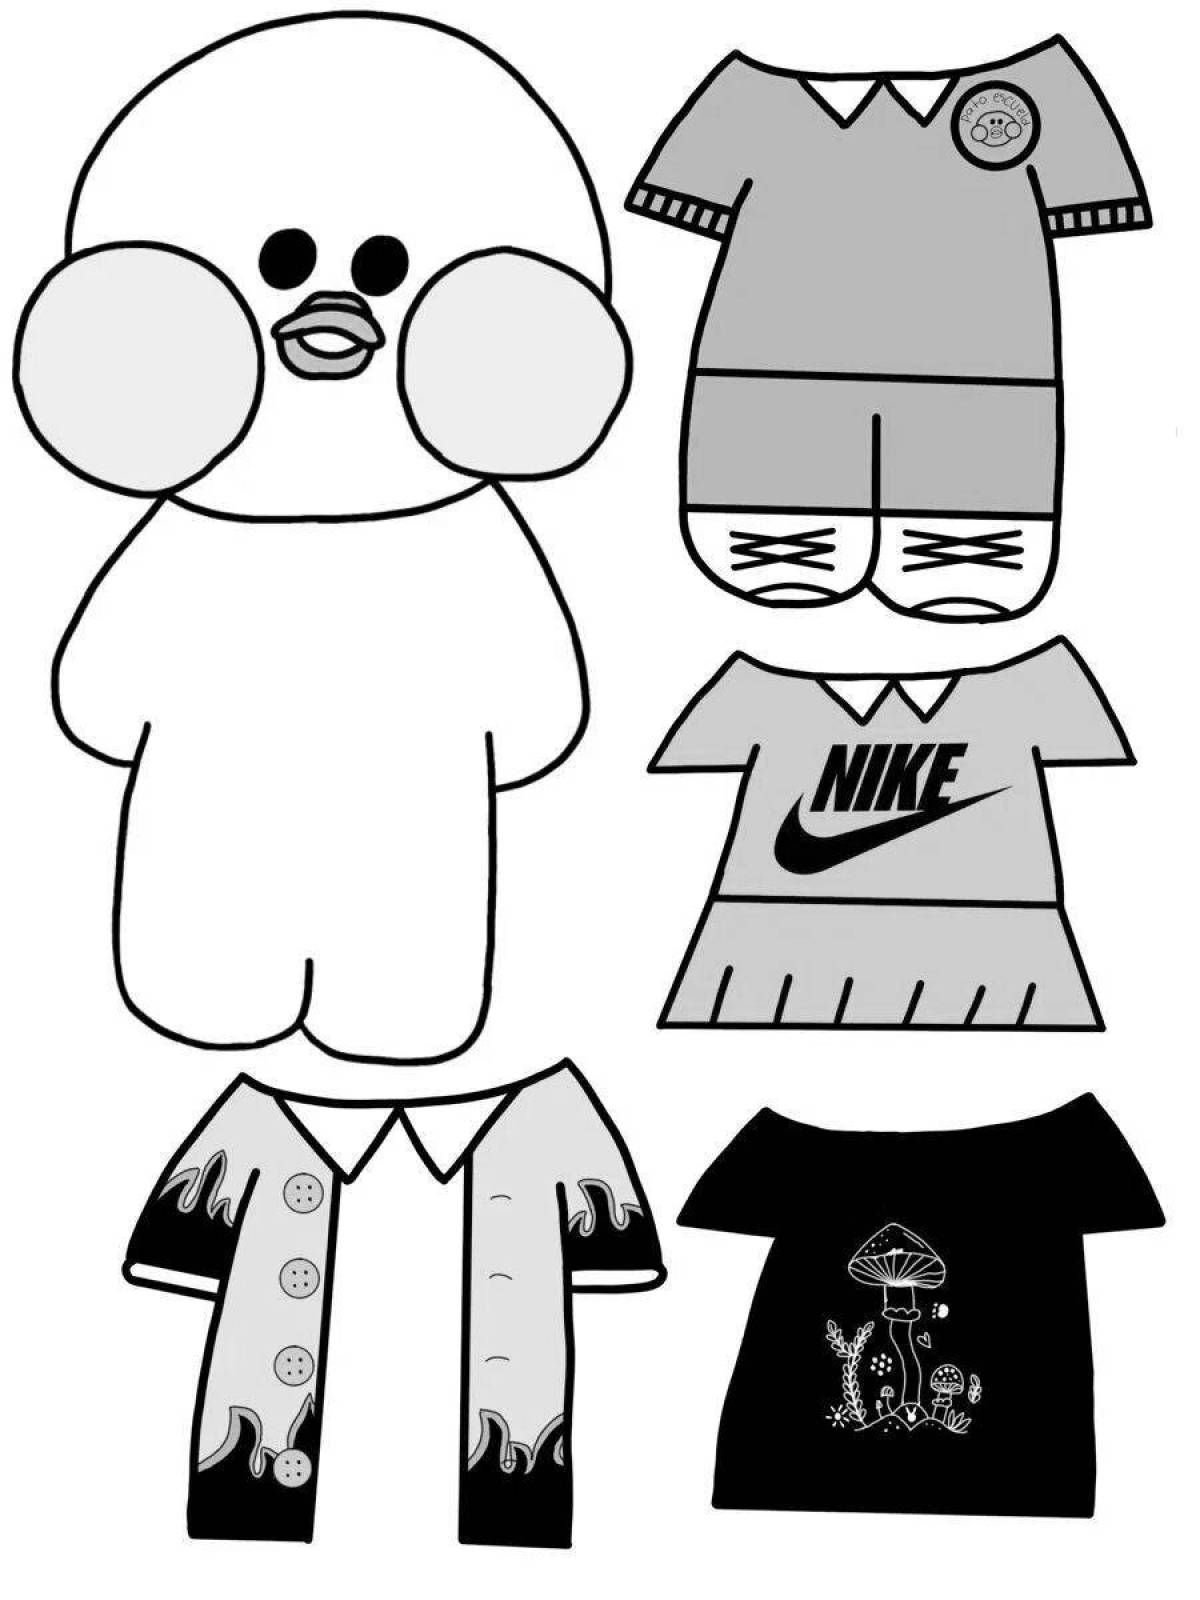 Unique clothes coloring page for ooty lalafanfan